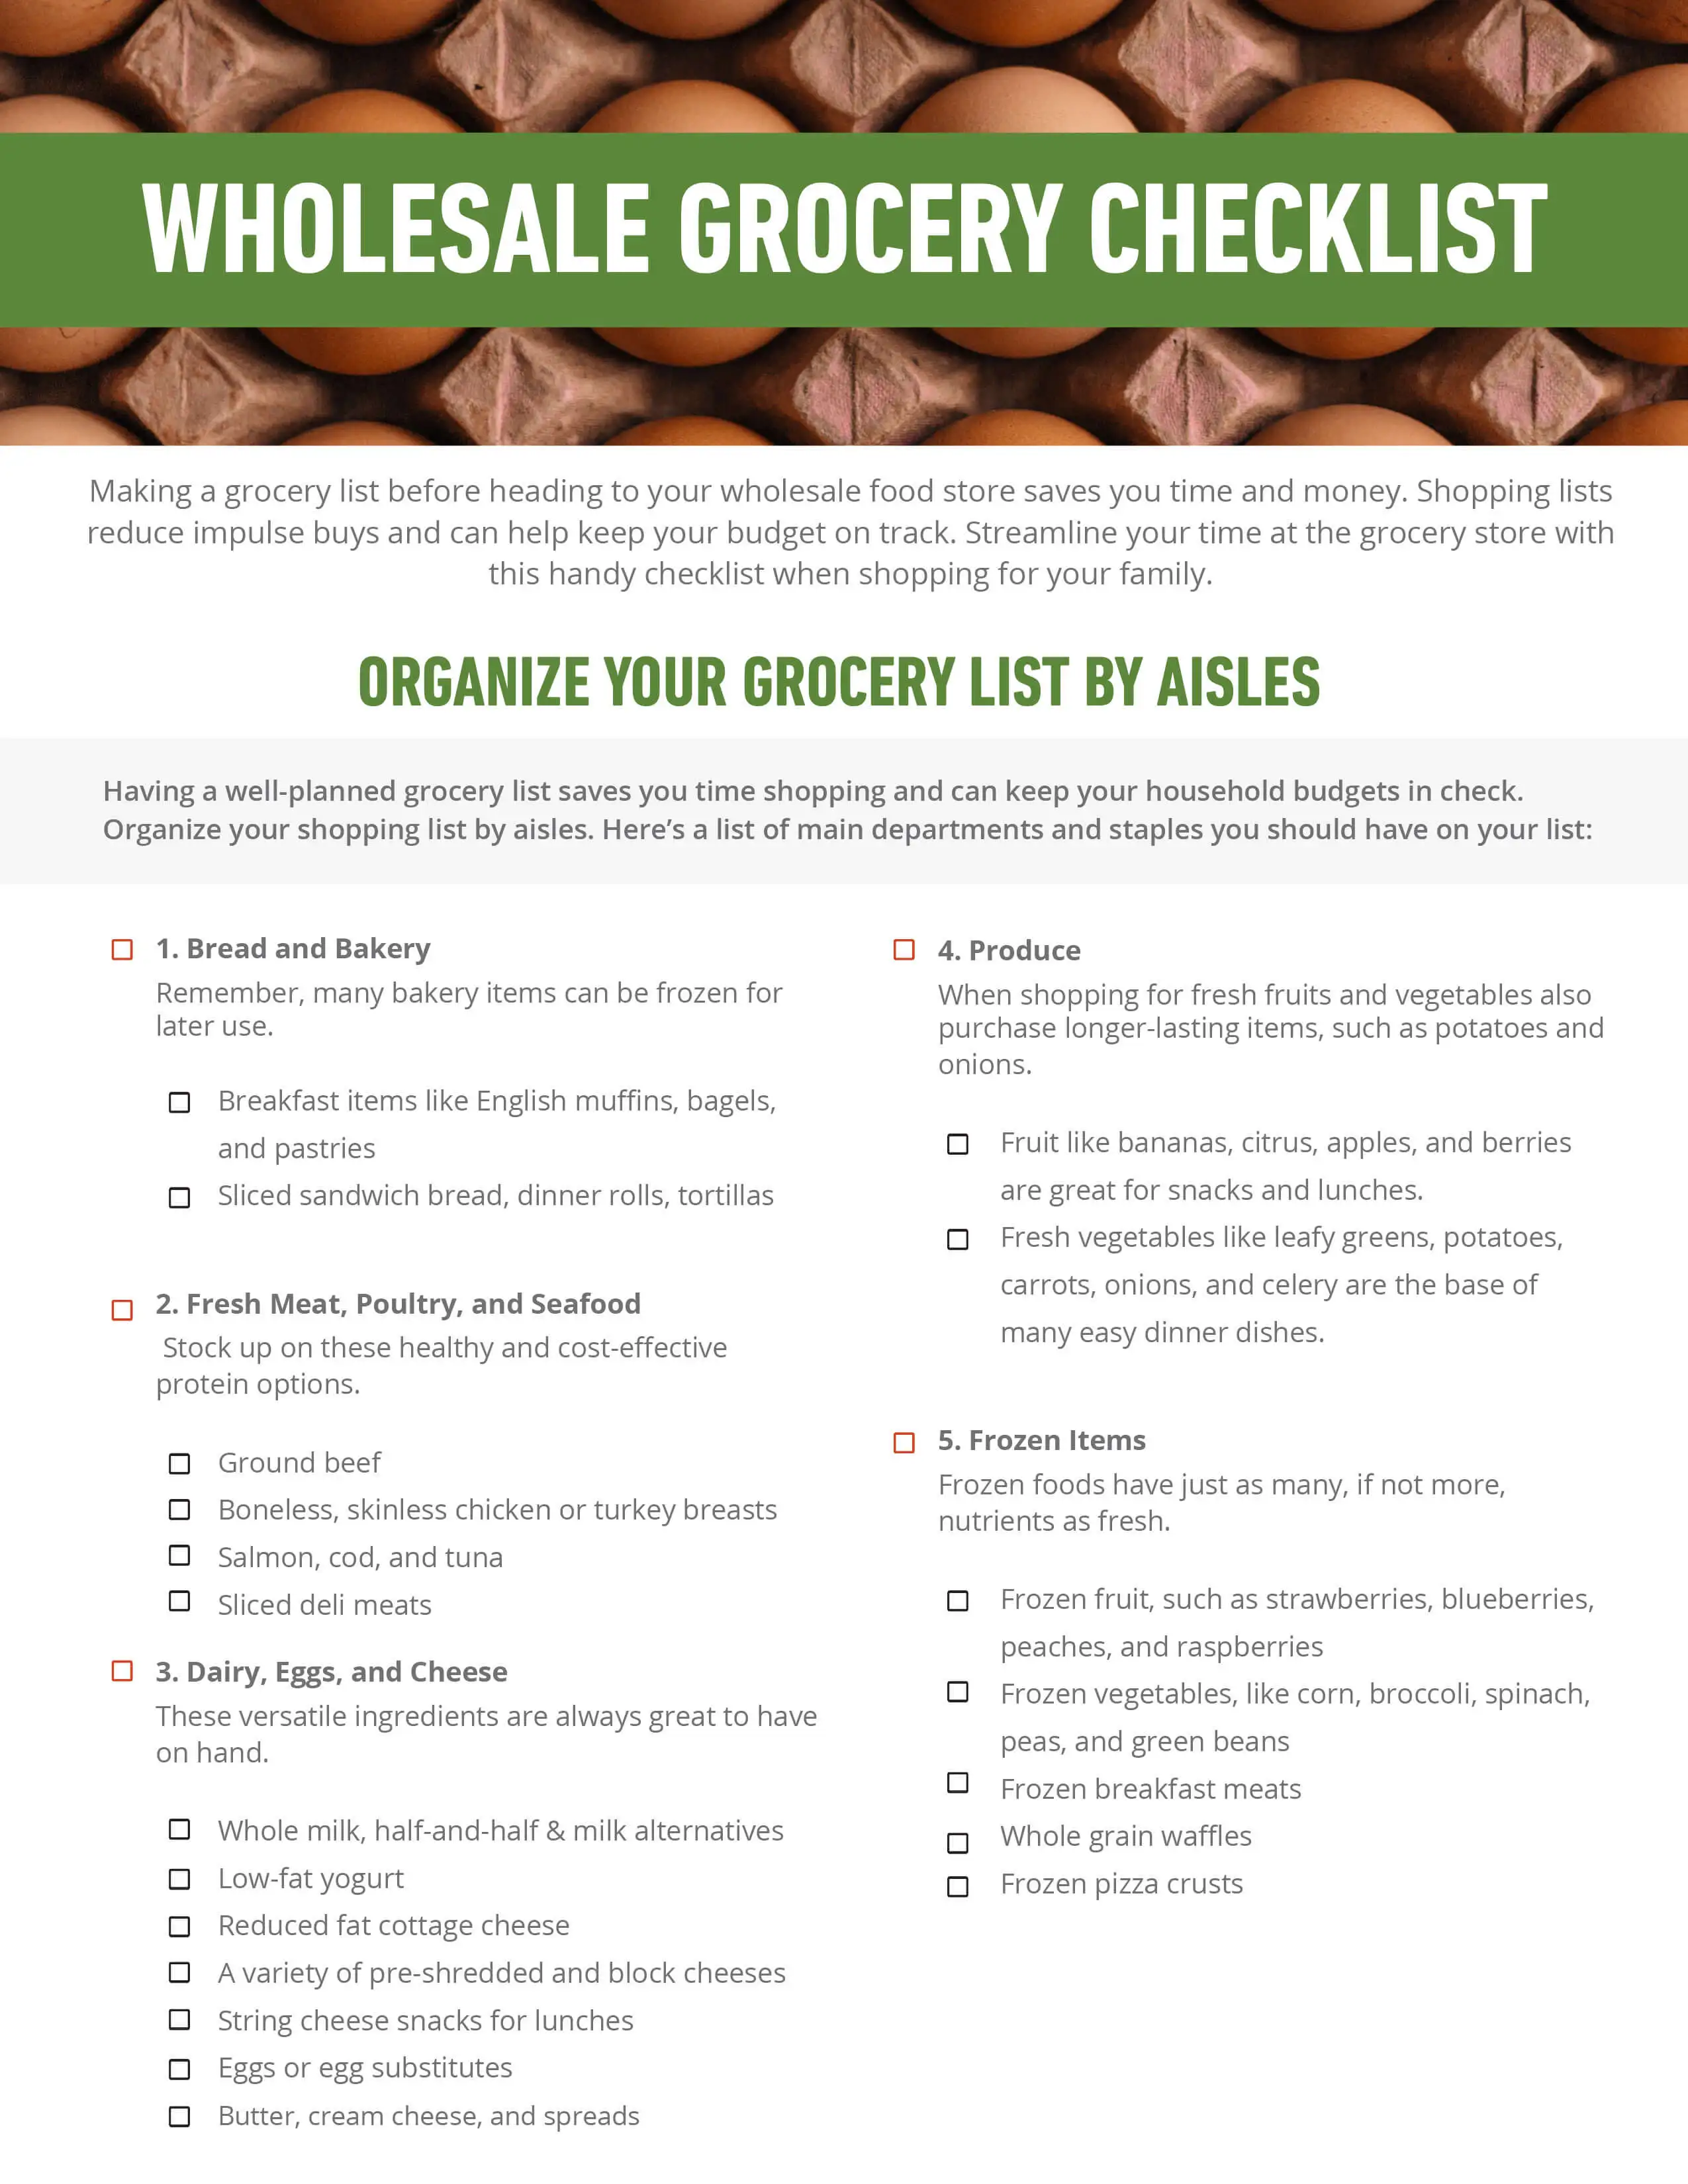 Wholesale Grocery Checklist